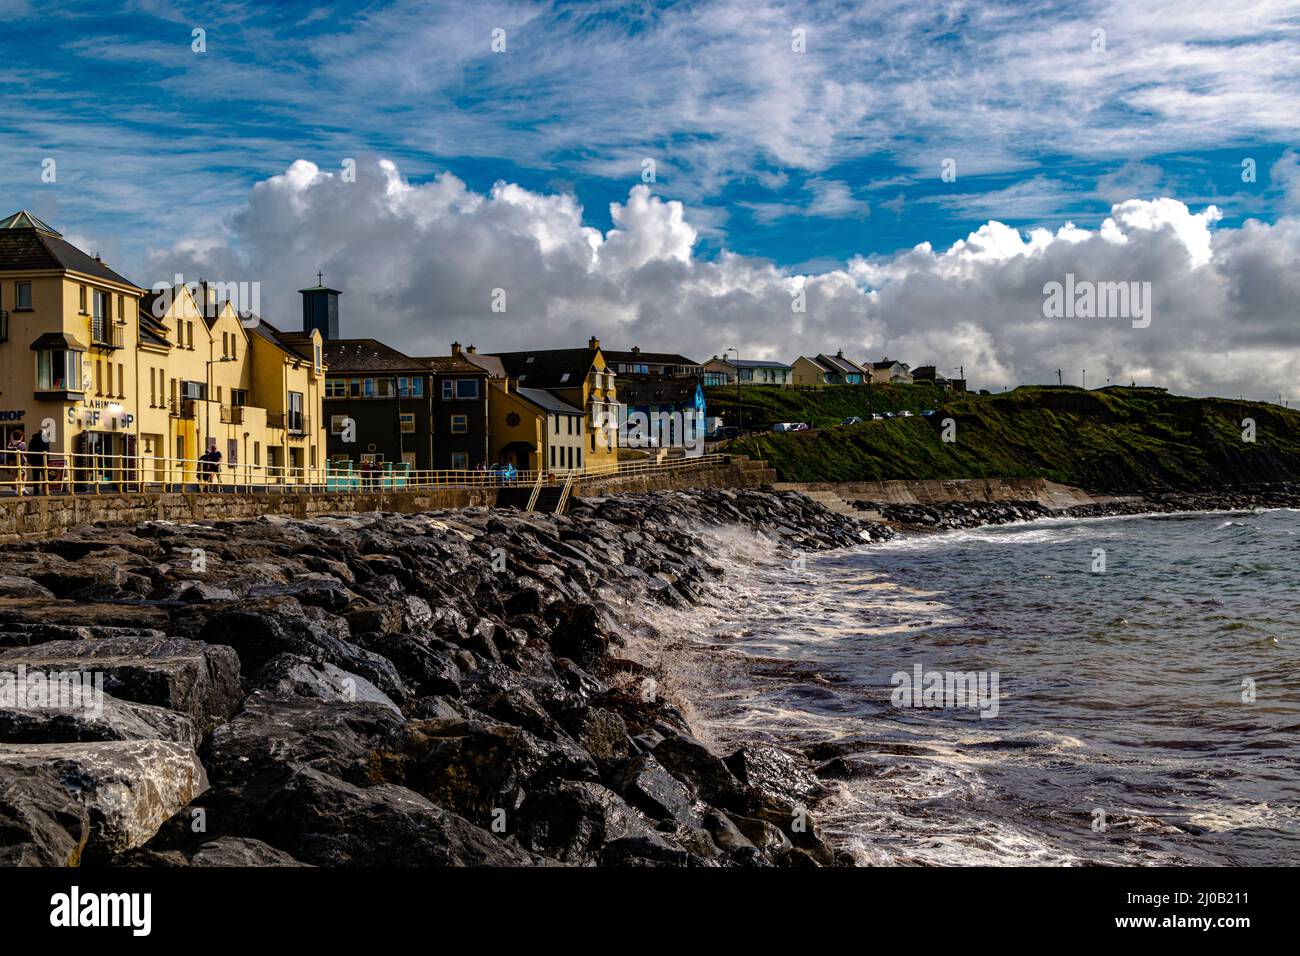 Lahinch beach In Ireland, popular place for surfing and having nice and relaxing day on the beach with great view on the ocean. Place for everyone. Stock Photo